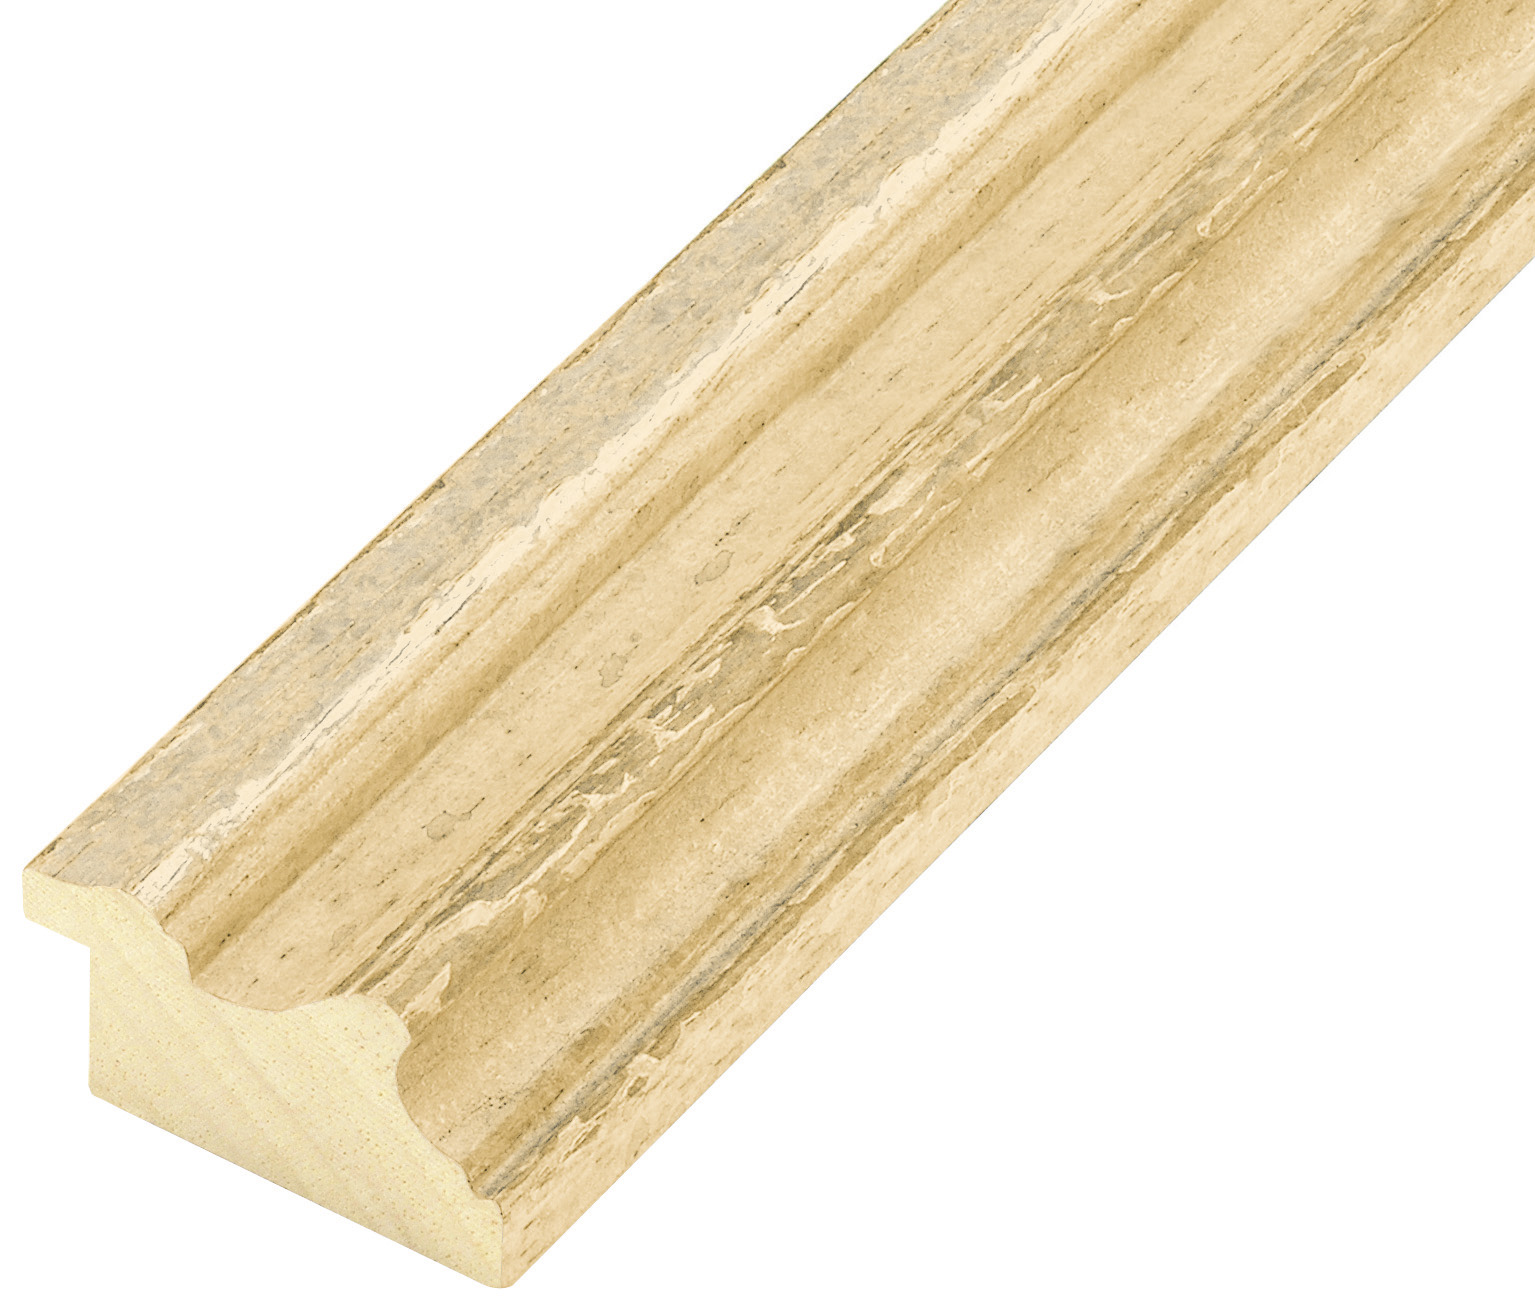 Mowlding ayous width 21 height 20, bare timber - 389G